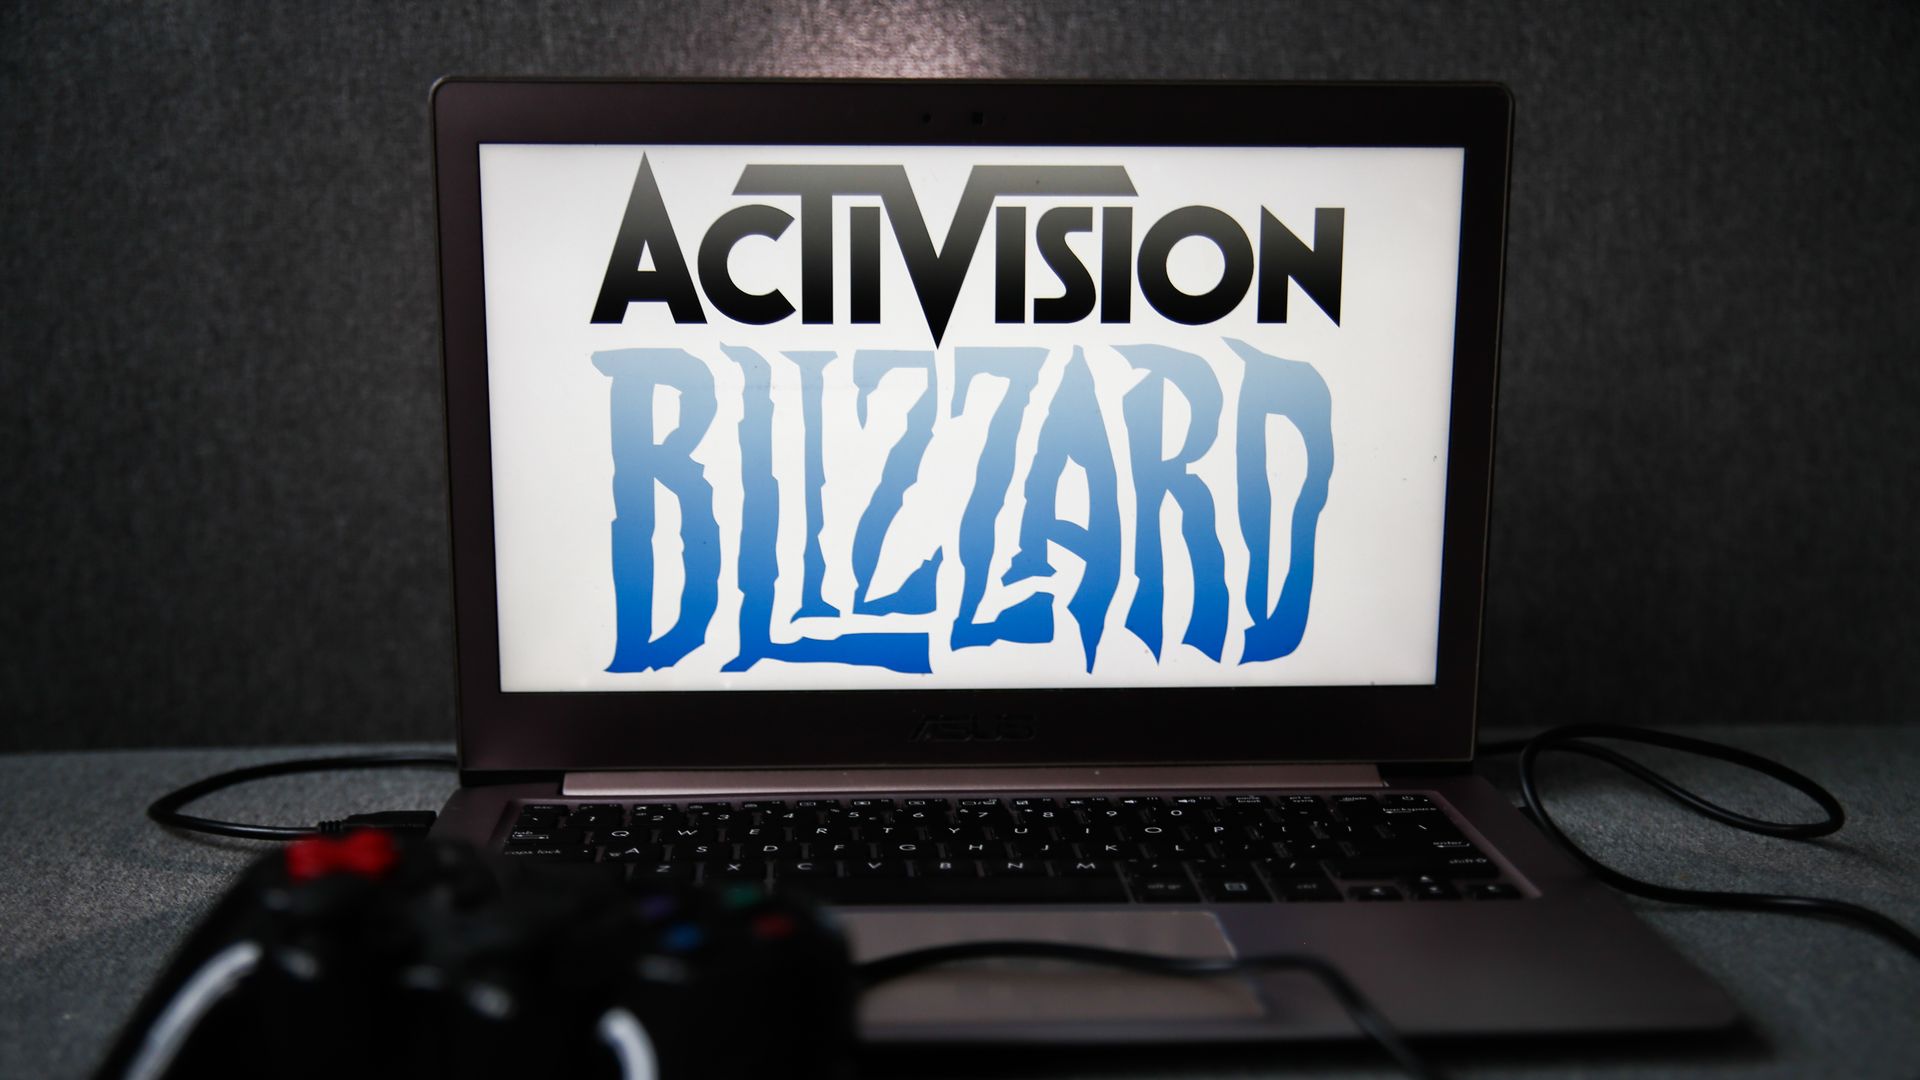 Gaming PC with the Activision Blizard logo on the screen